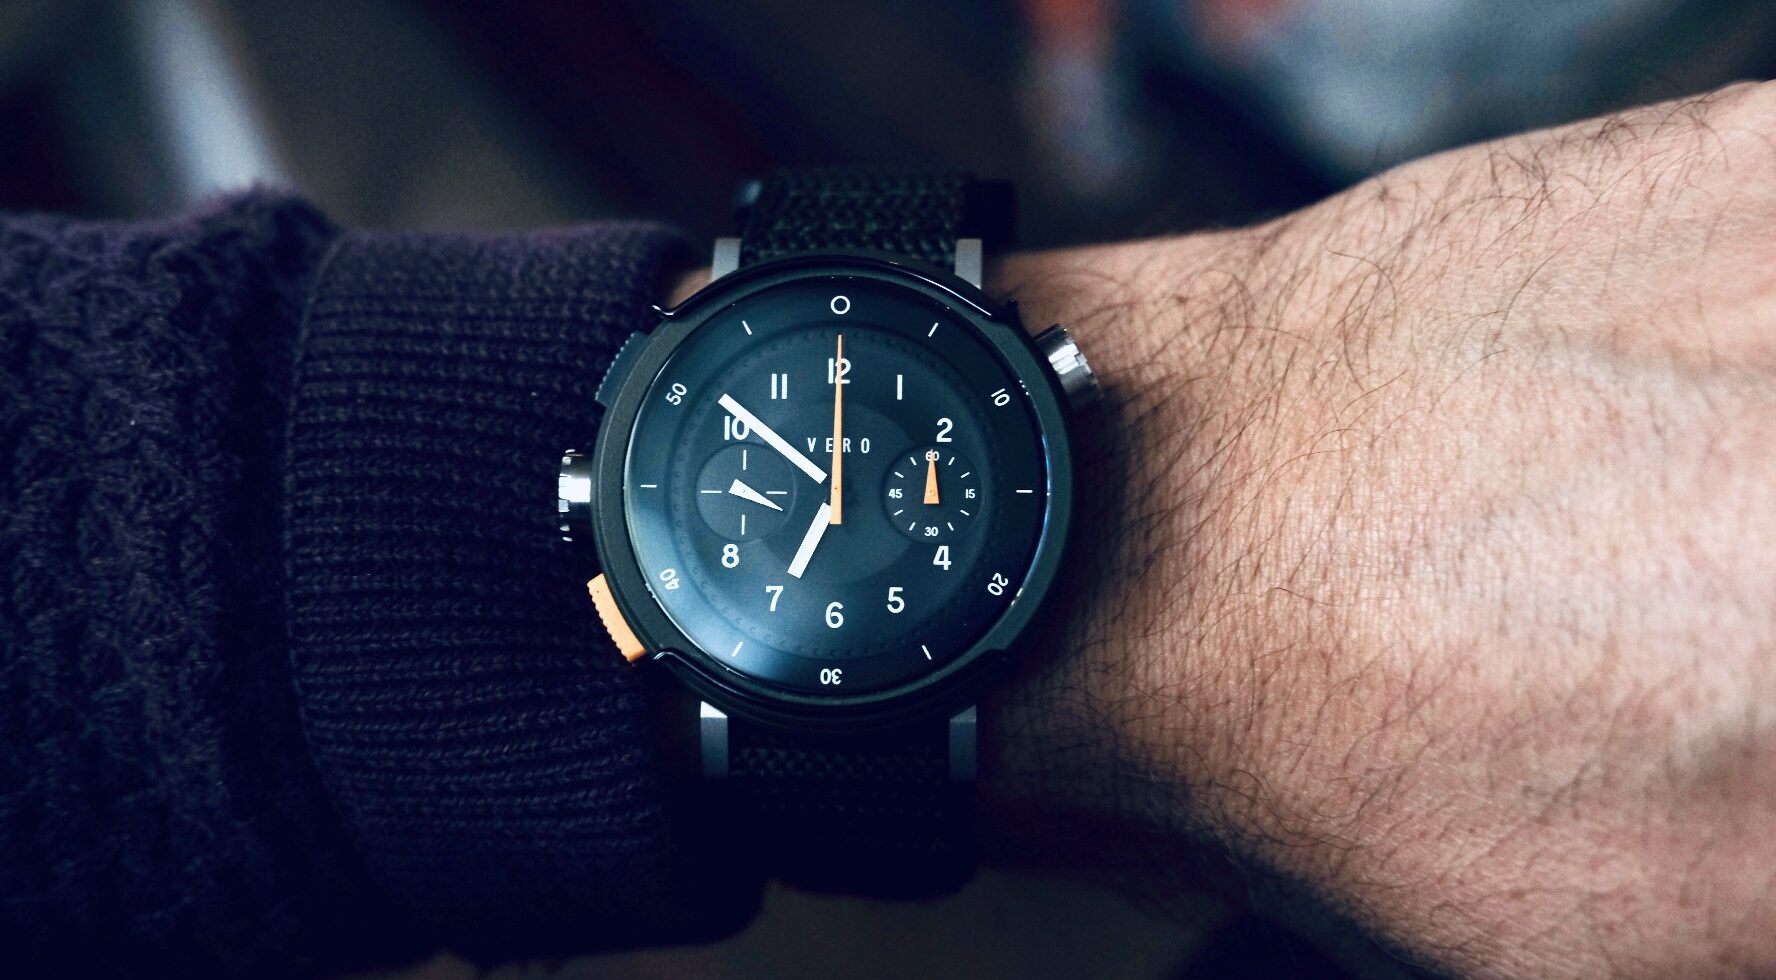 INTRODUCTION : VERO WATCHES